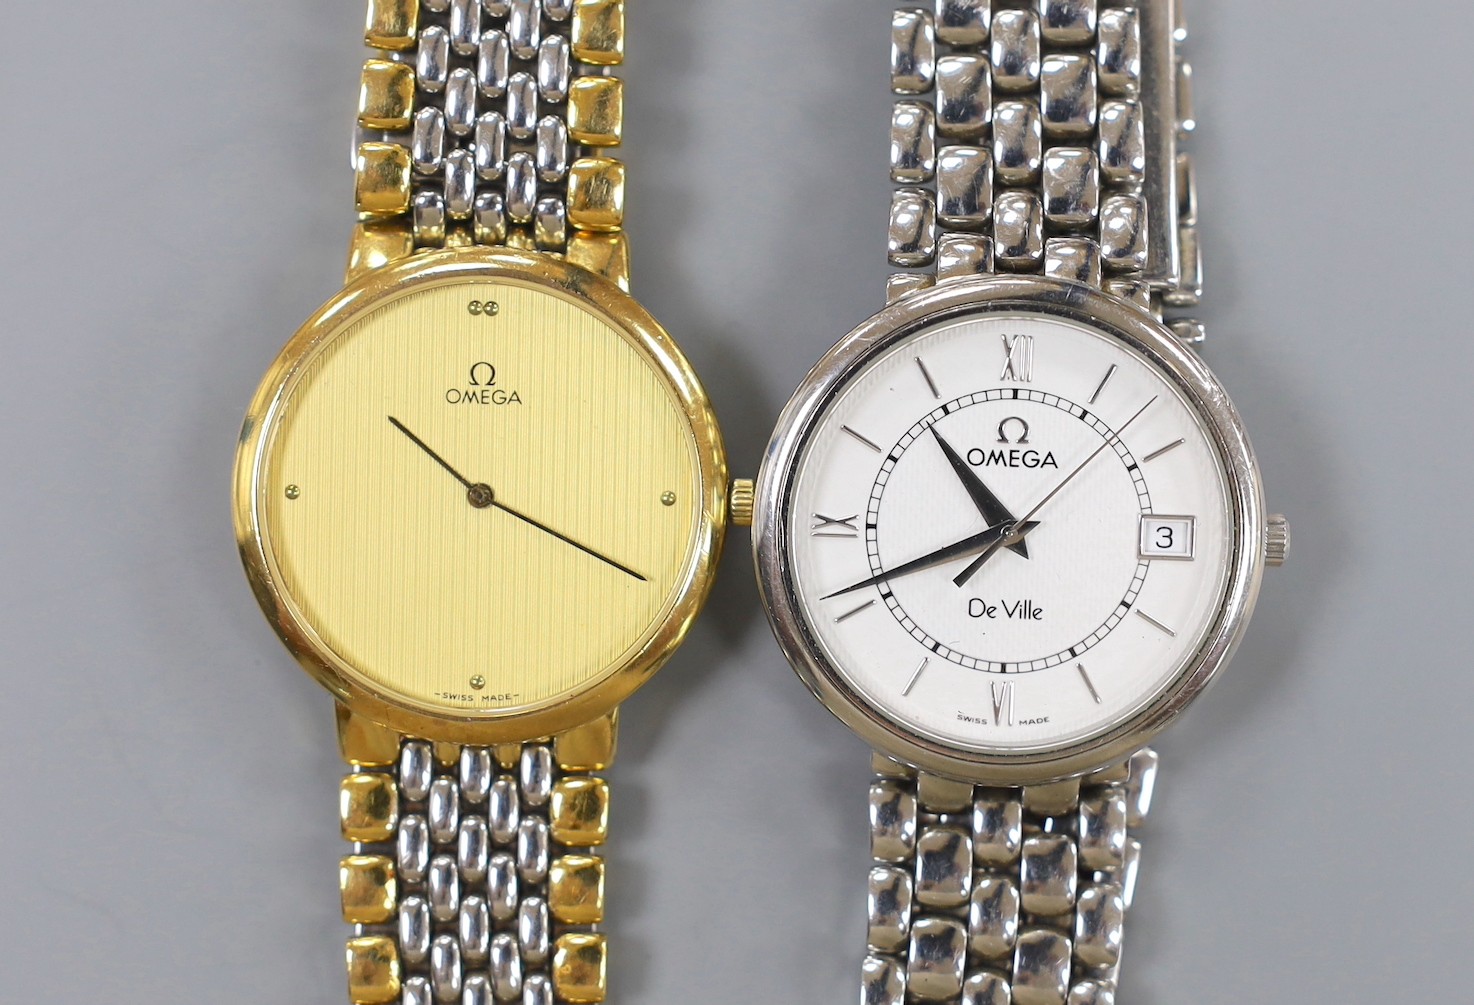 A gentleman's stainless steel Omega De Ville quartz wrist watch and a similar two tone Omega quartz wrist watch, no box or papers.